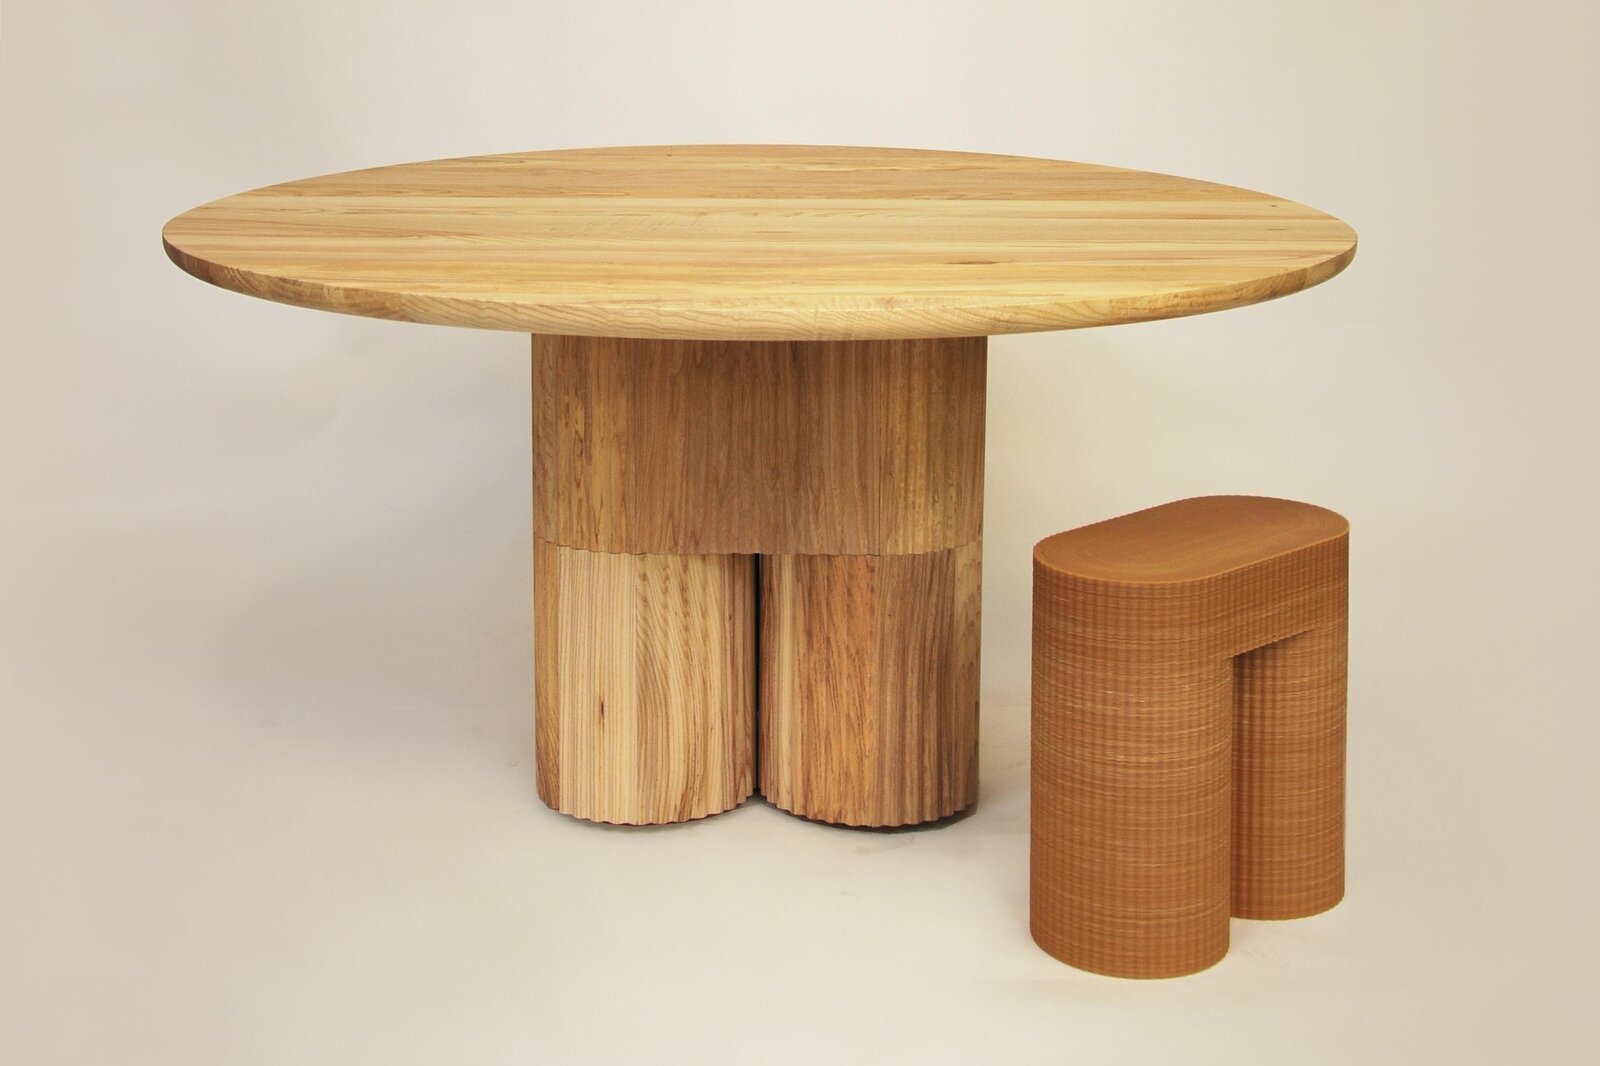 These 3D-Printed Wooden Tables and Chairs Aim to Disrupt the Cycle of Furniture Waste